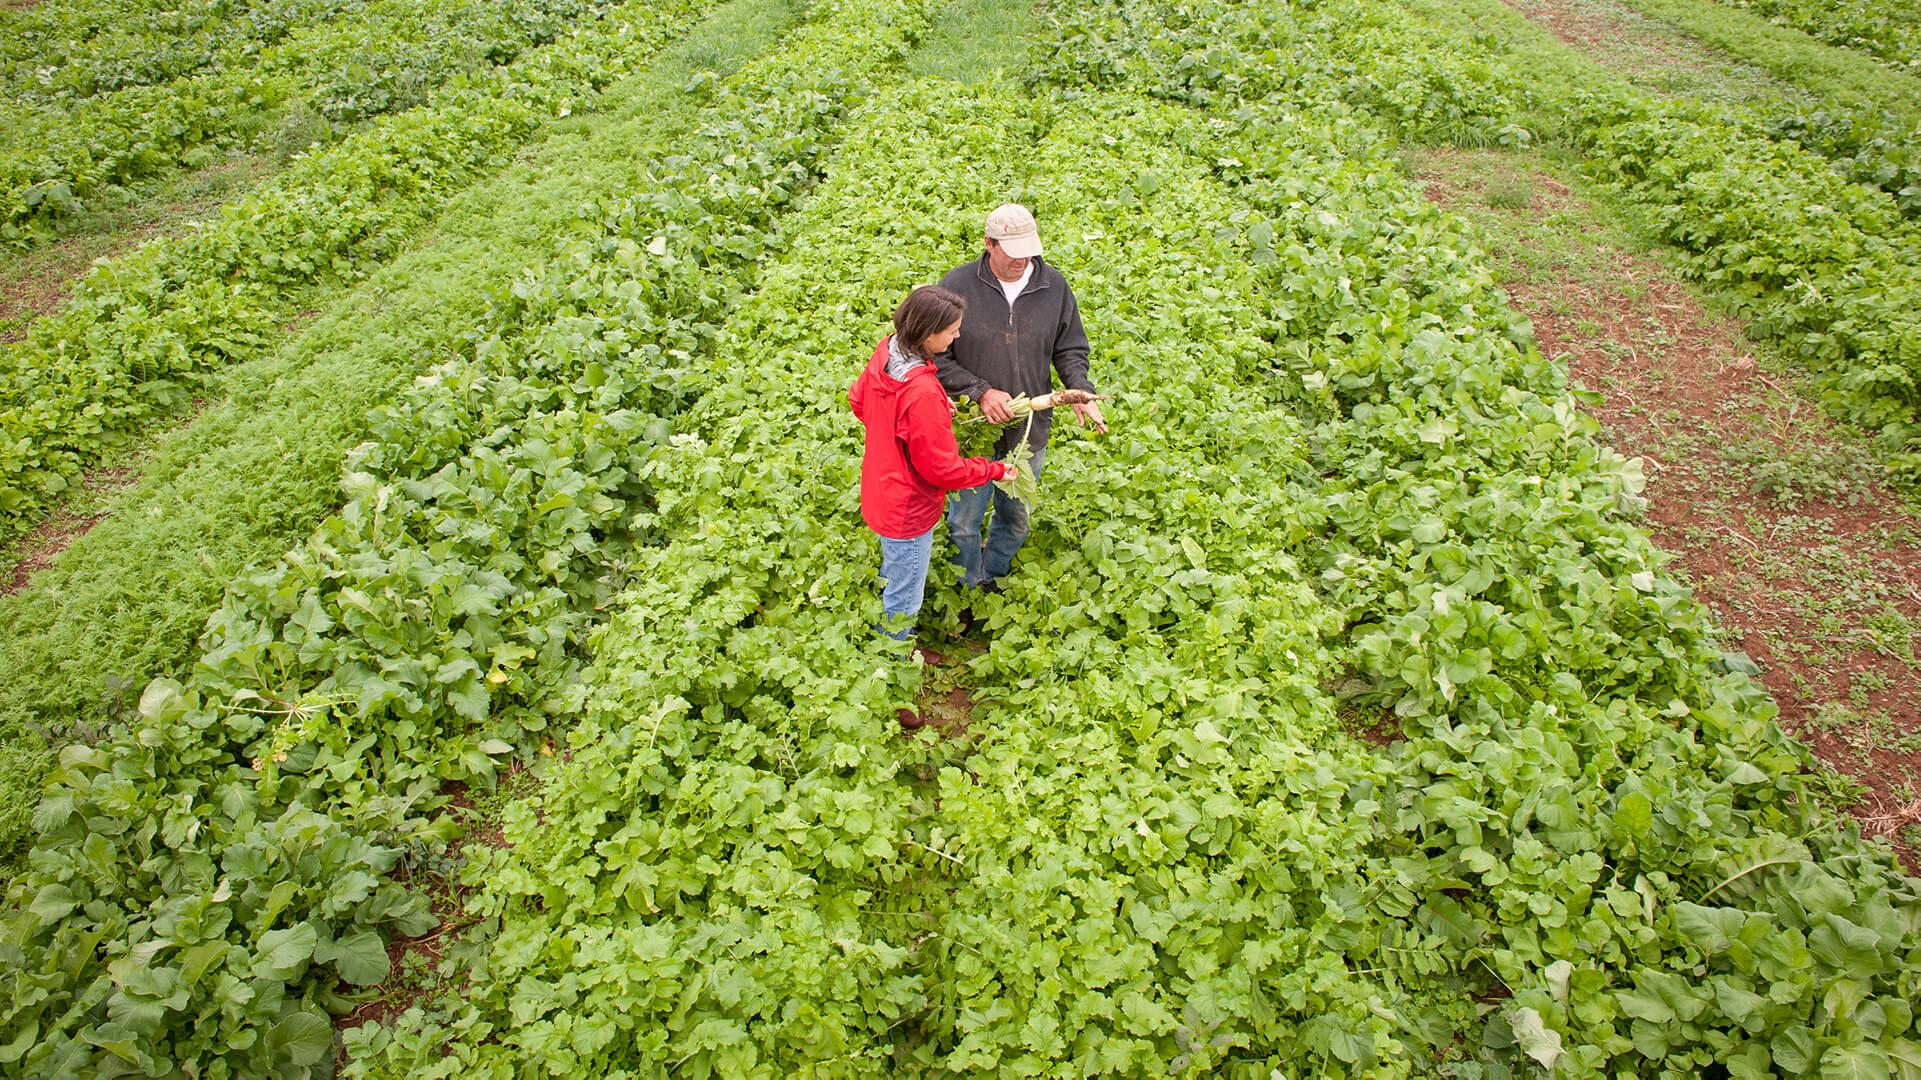 Two people standing in the middle of a tillage radish cover crop field